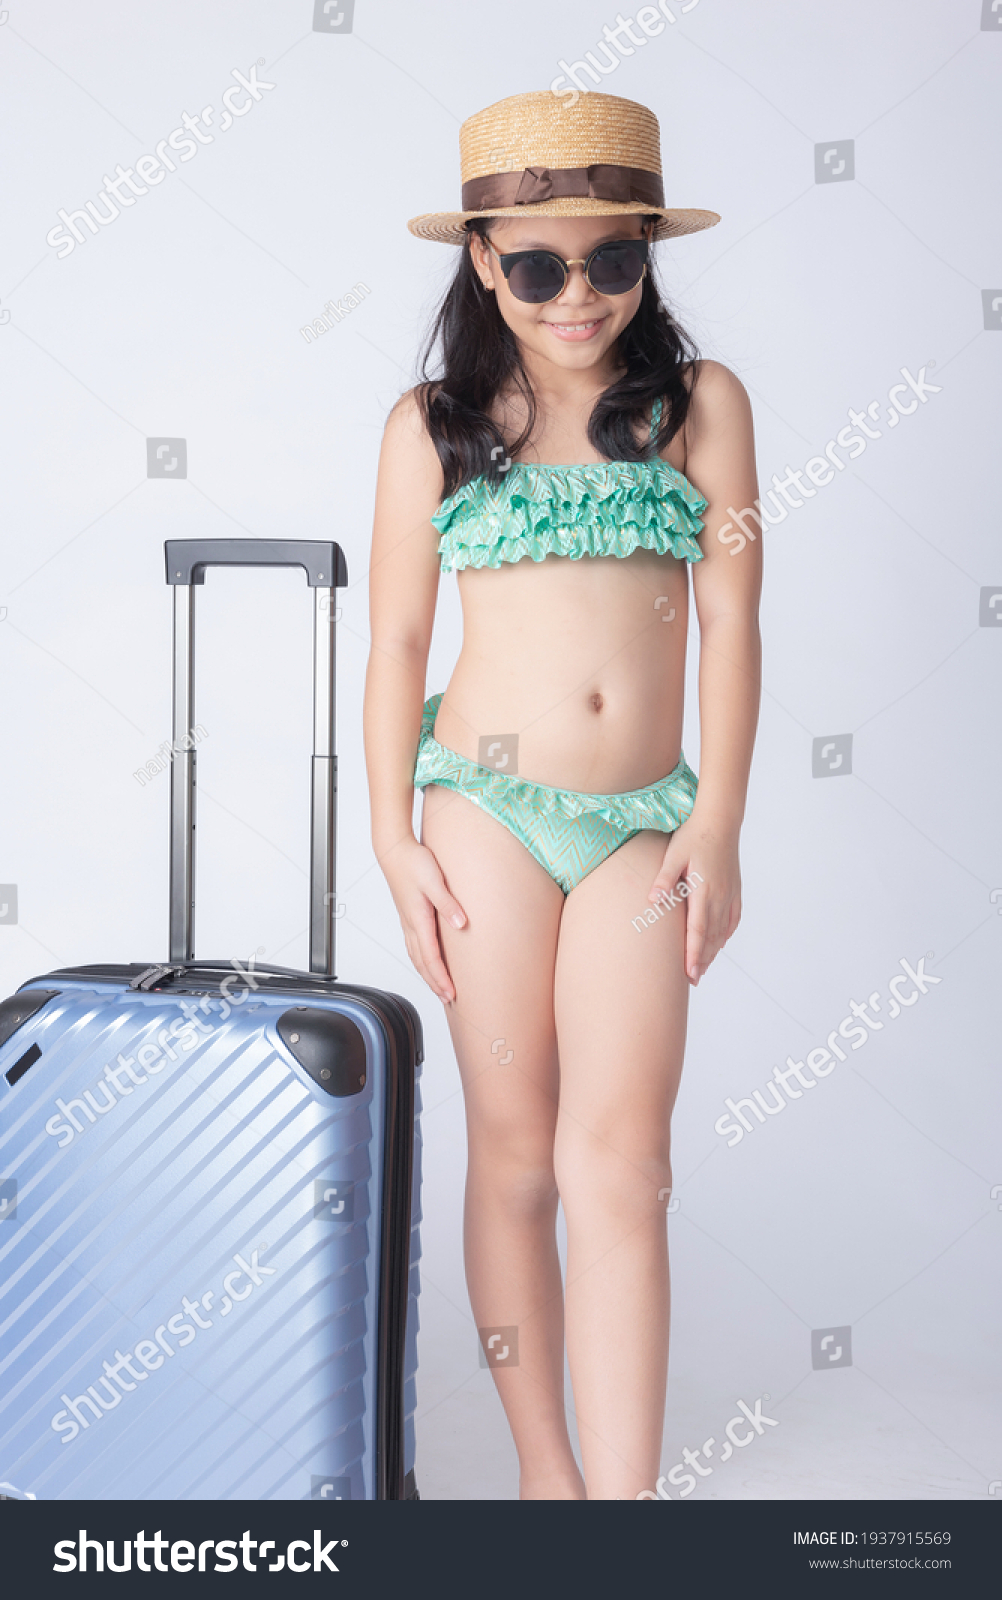 commentator employment section 2,451 Child bikini model Stock Photos, Images & Photography | Shutterstock